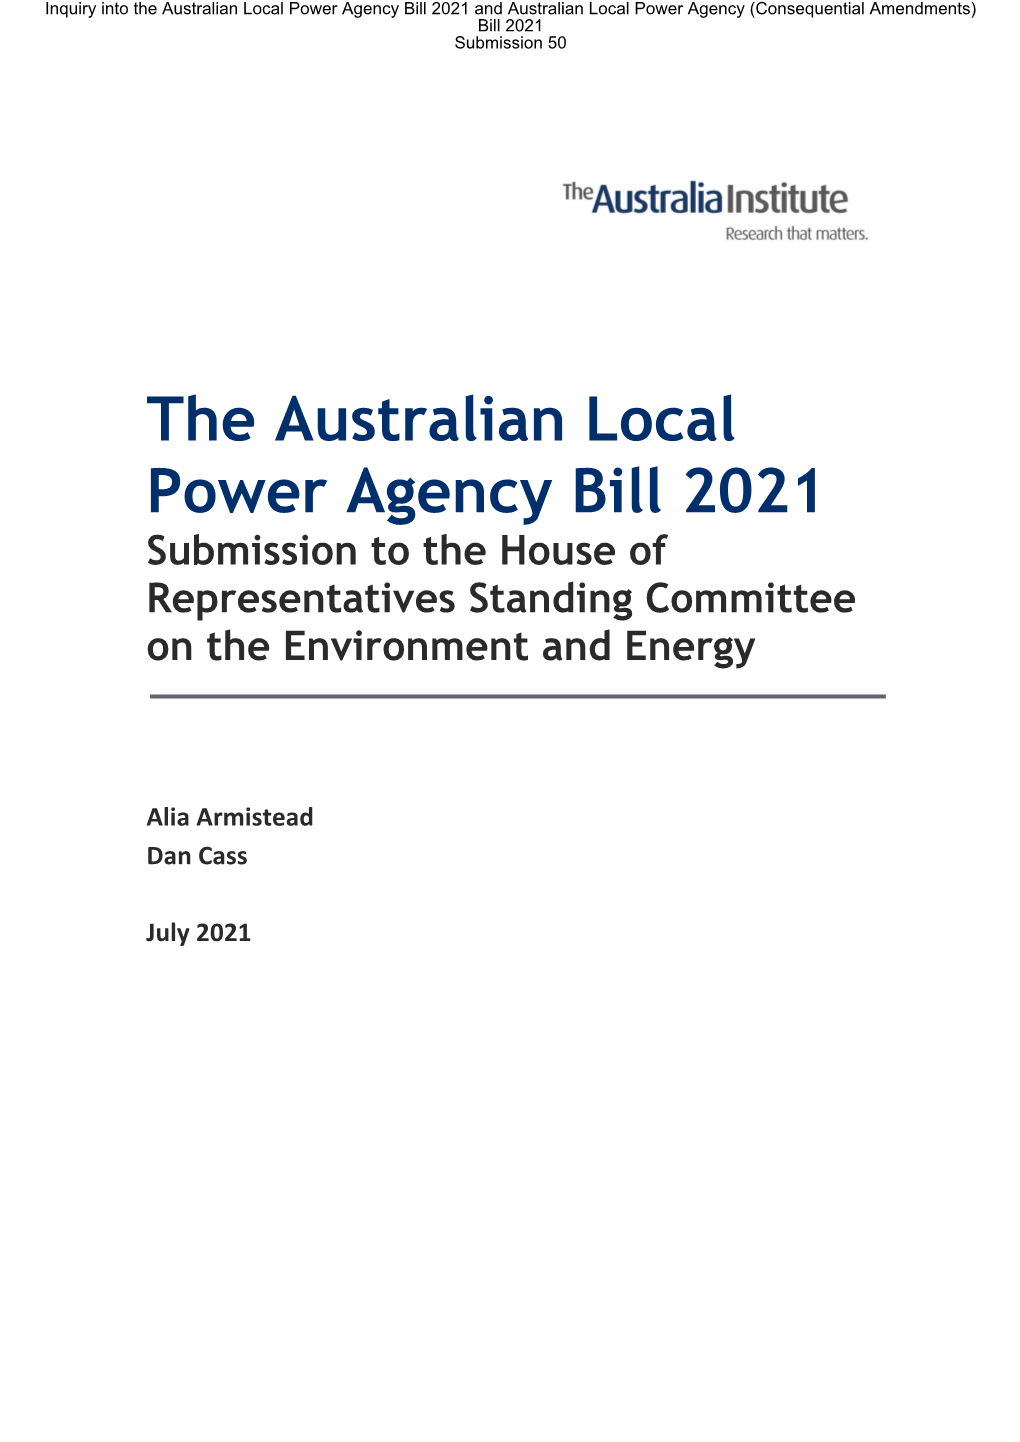 The Australian Local Power Agency Bill 2021 and Australian Local Power Agency (Consequential Amendments) Bill 2021 Submission 50